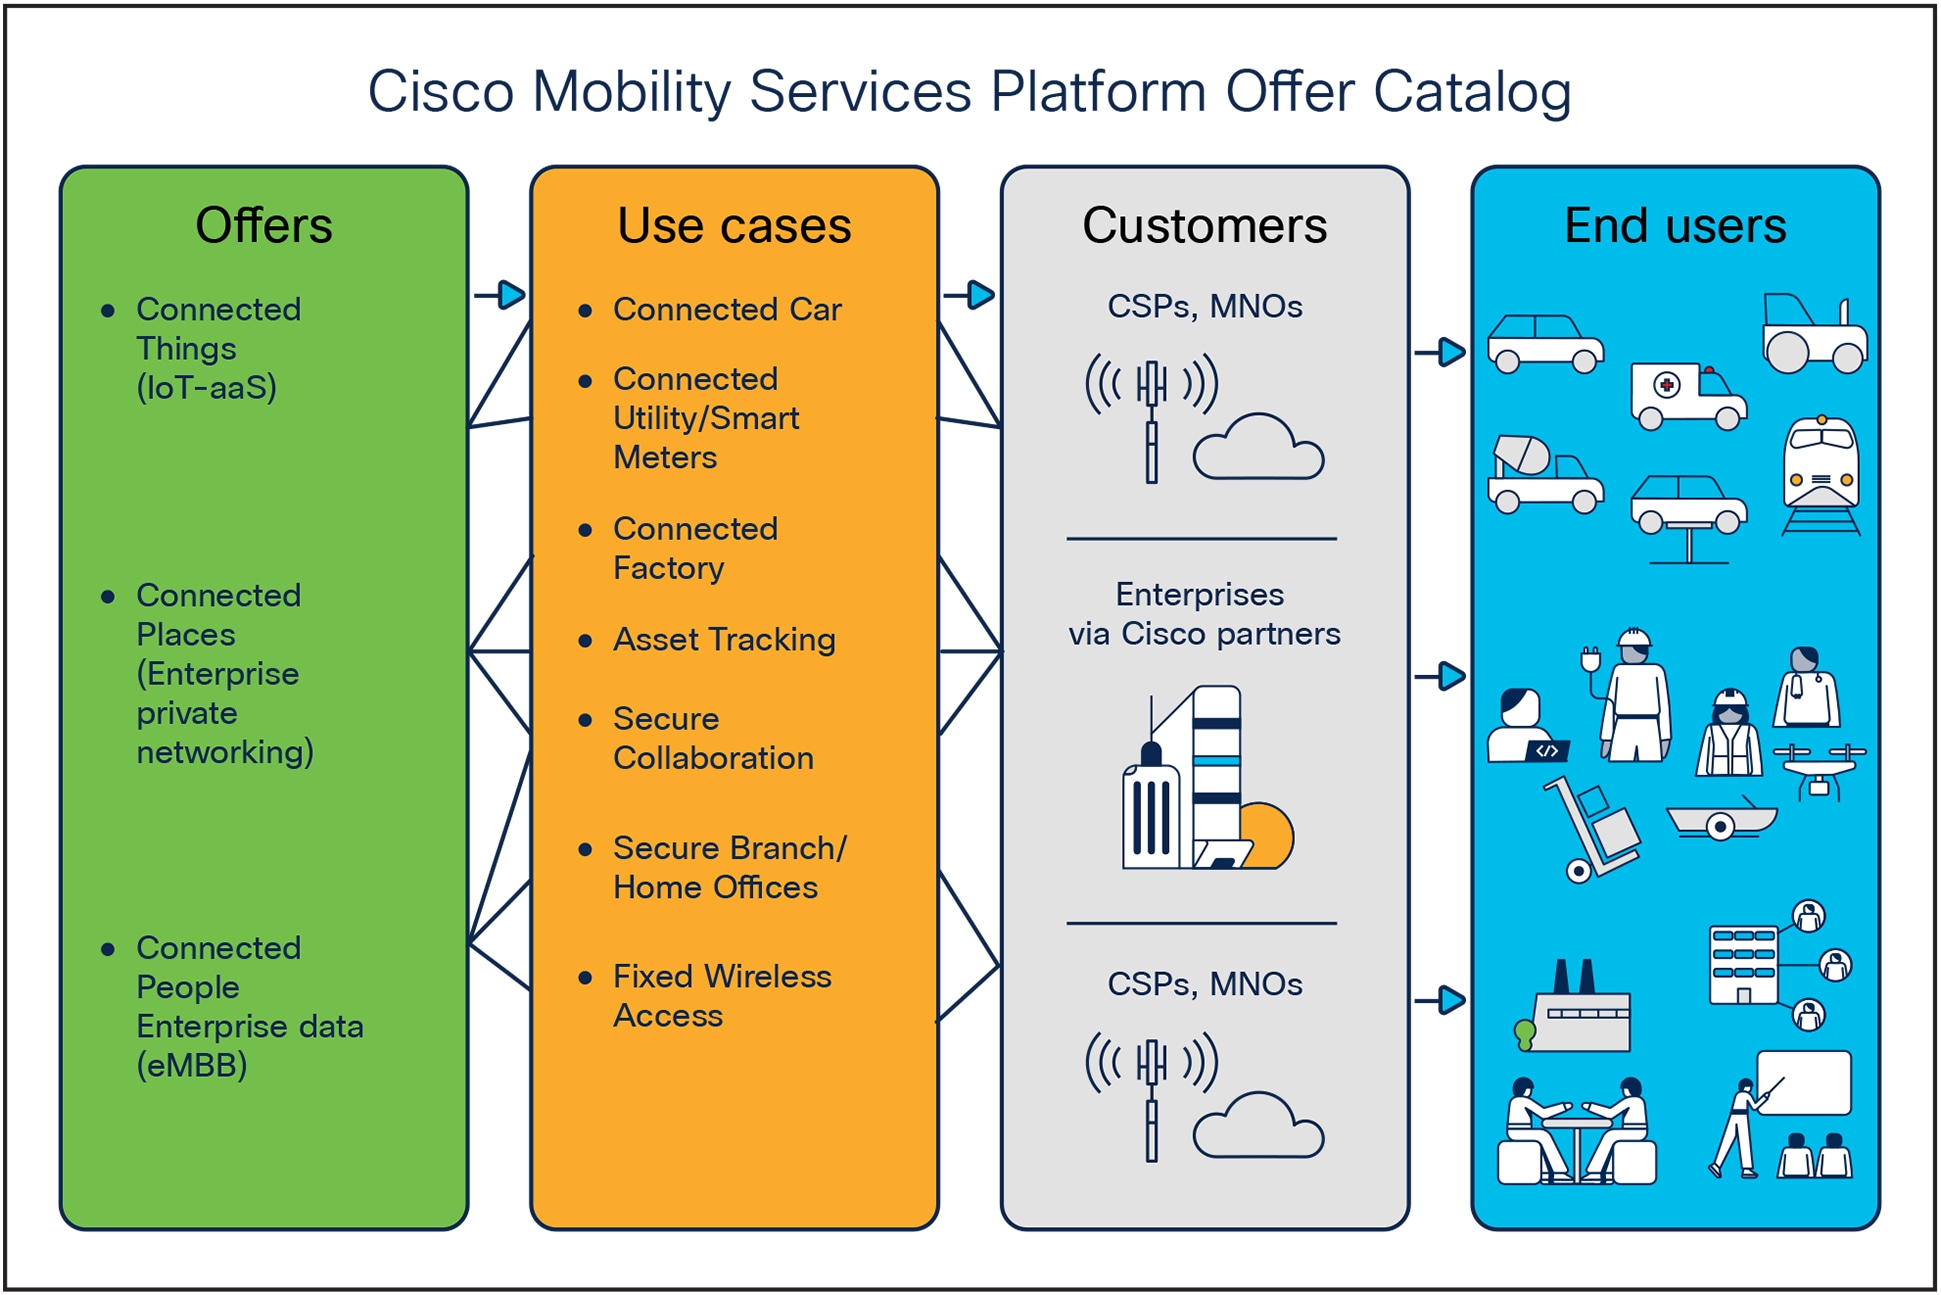 Cisco Mobility Services Subscription Offers and Example Use Cases Addressed